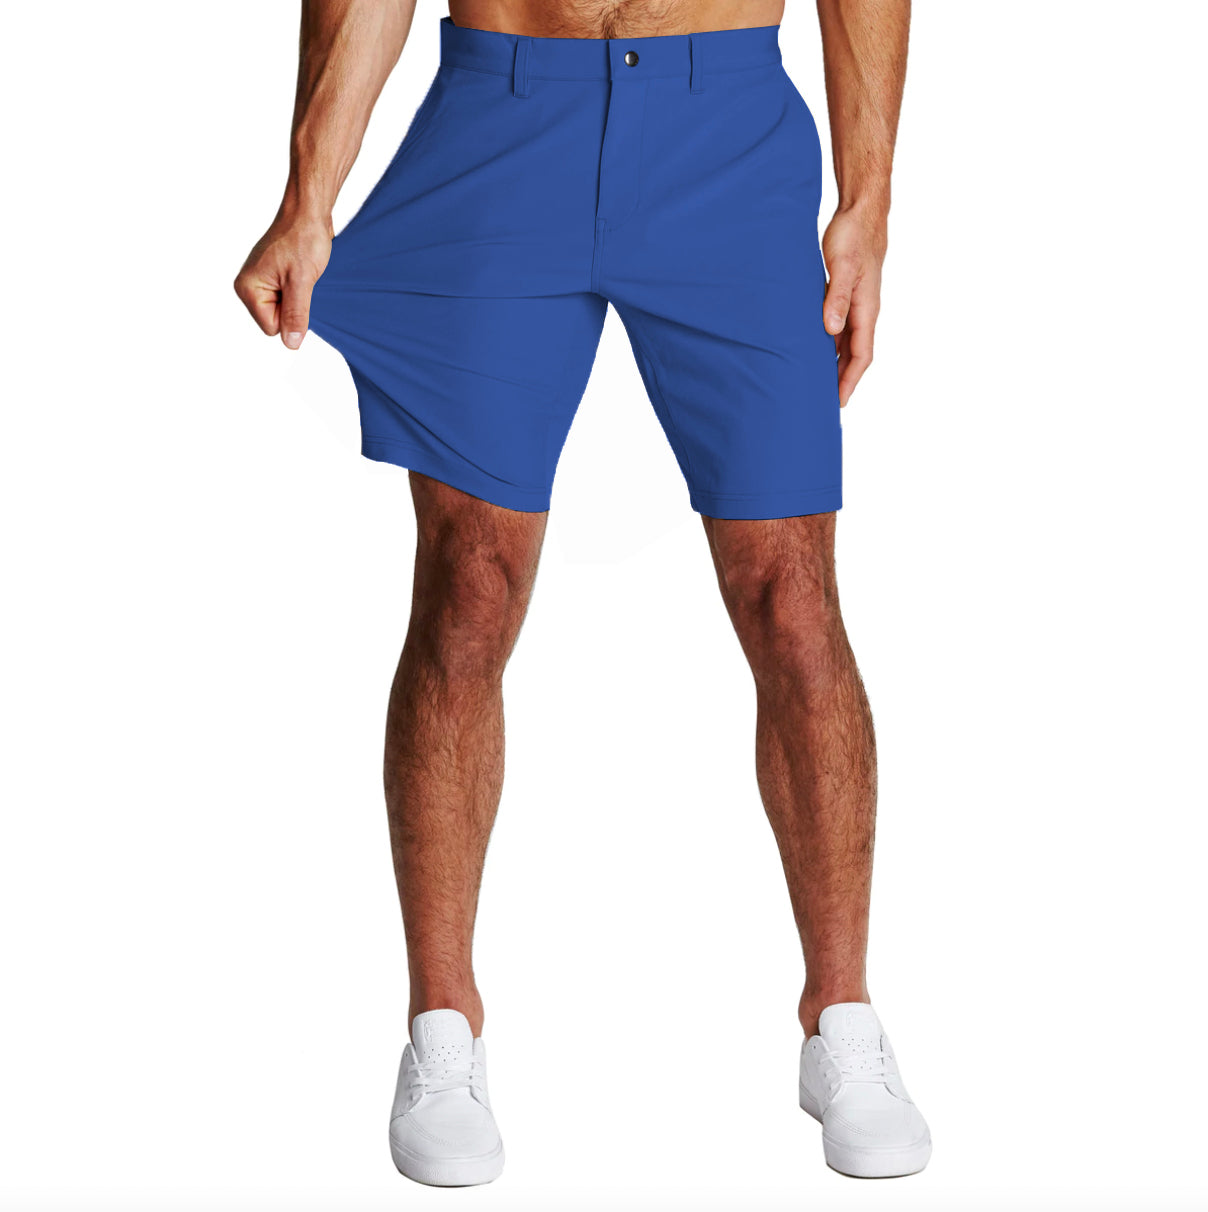 Athletic Fit Shorts - Royal Blue - State and Liberty Clothing Company